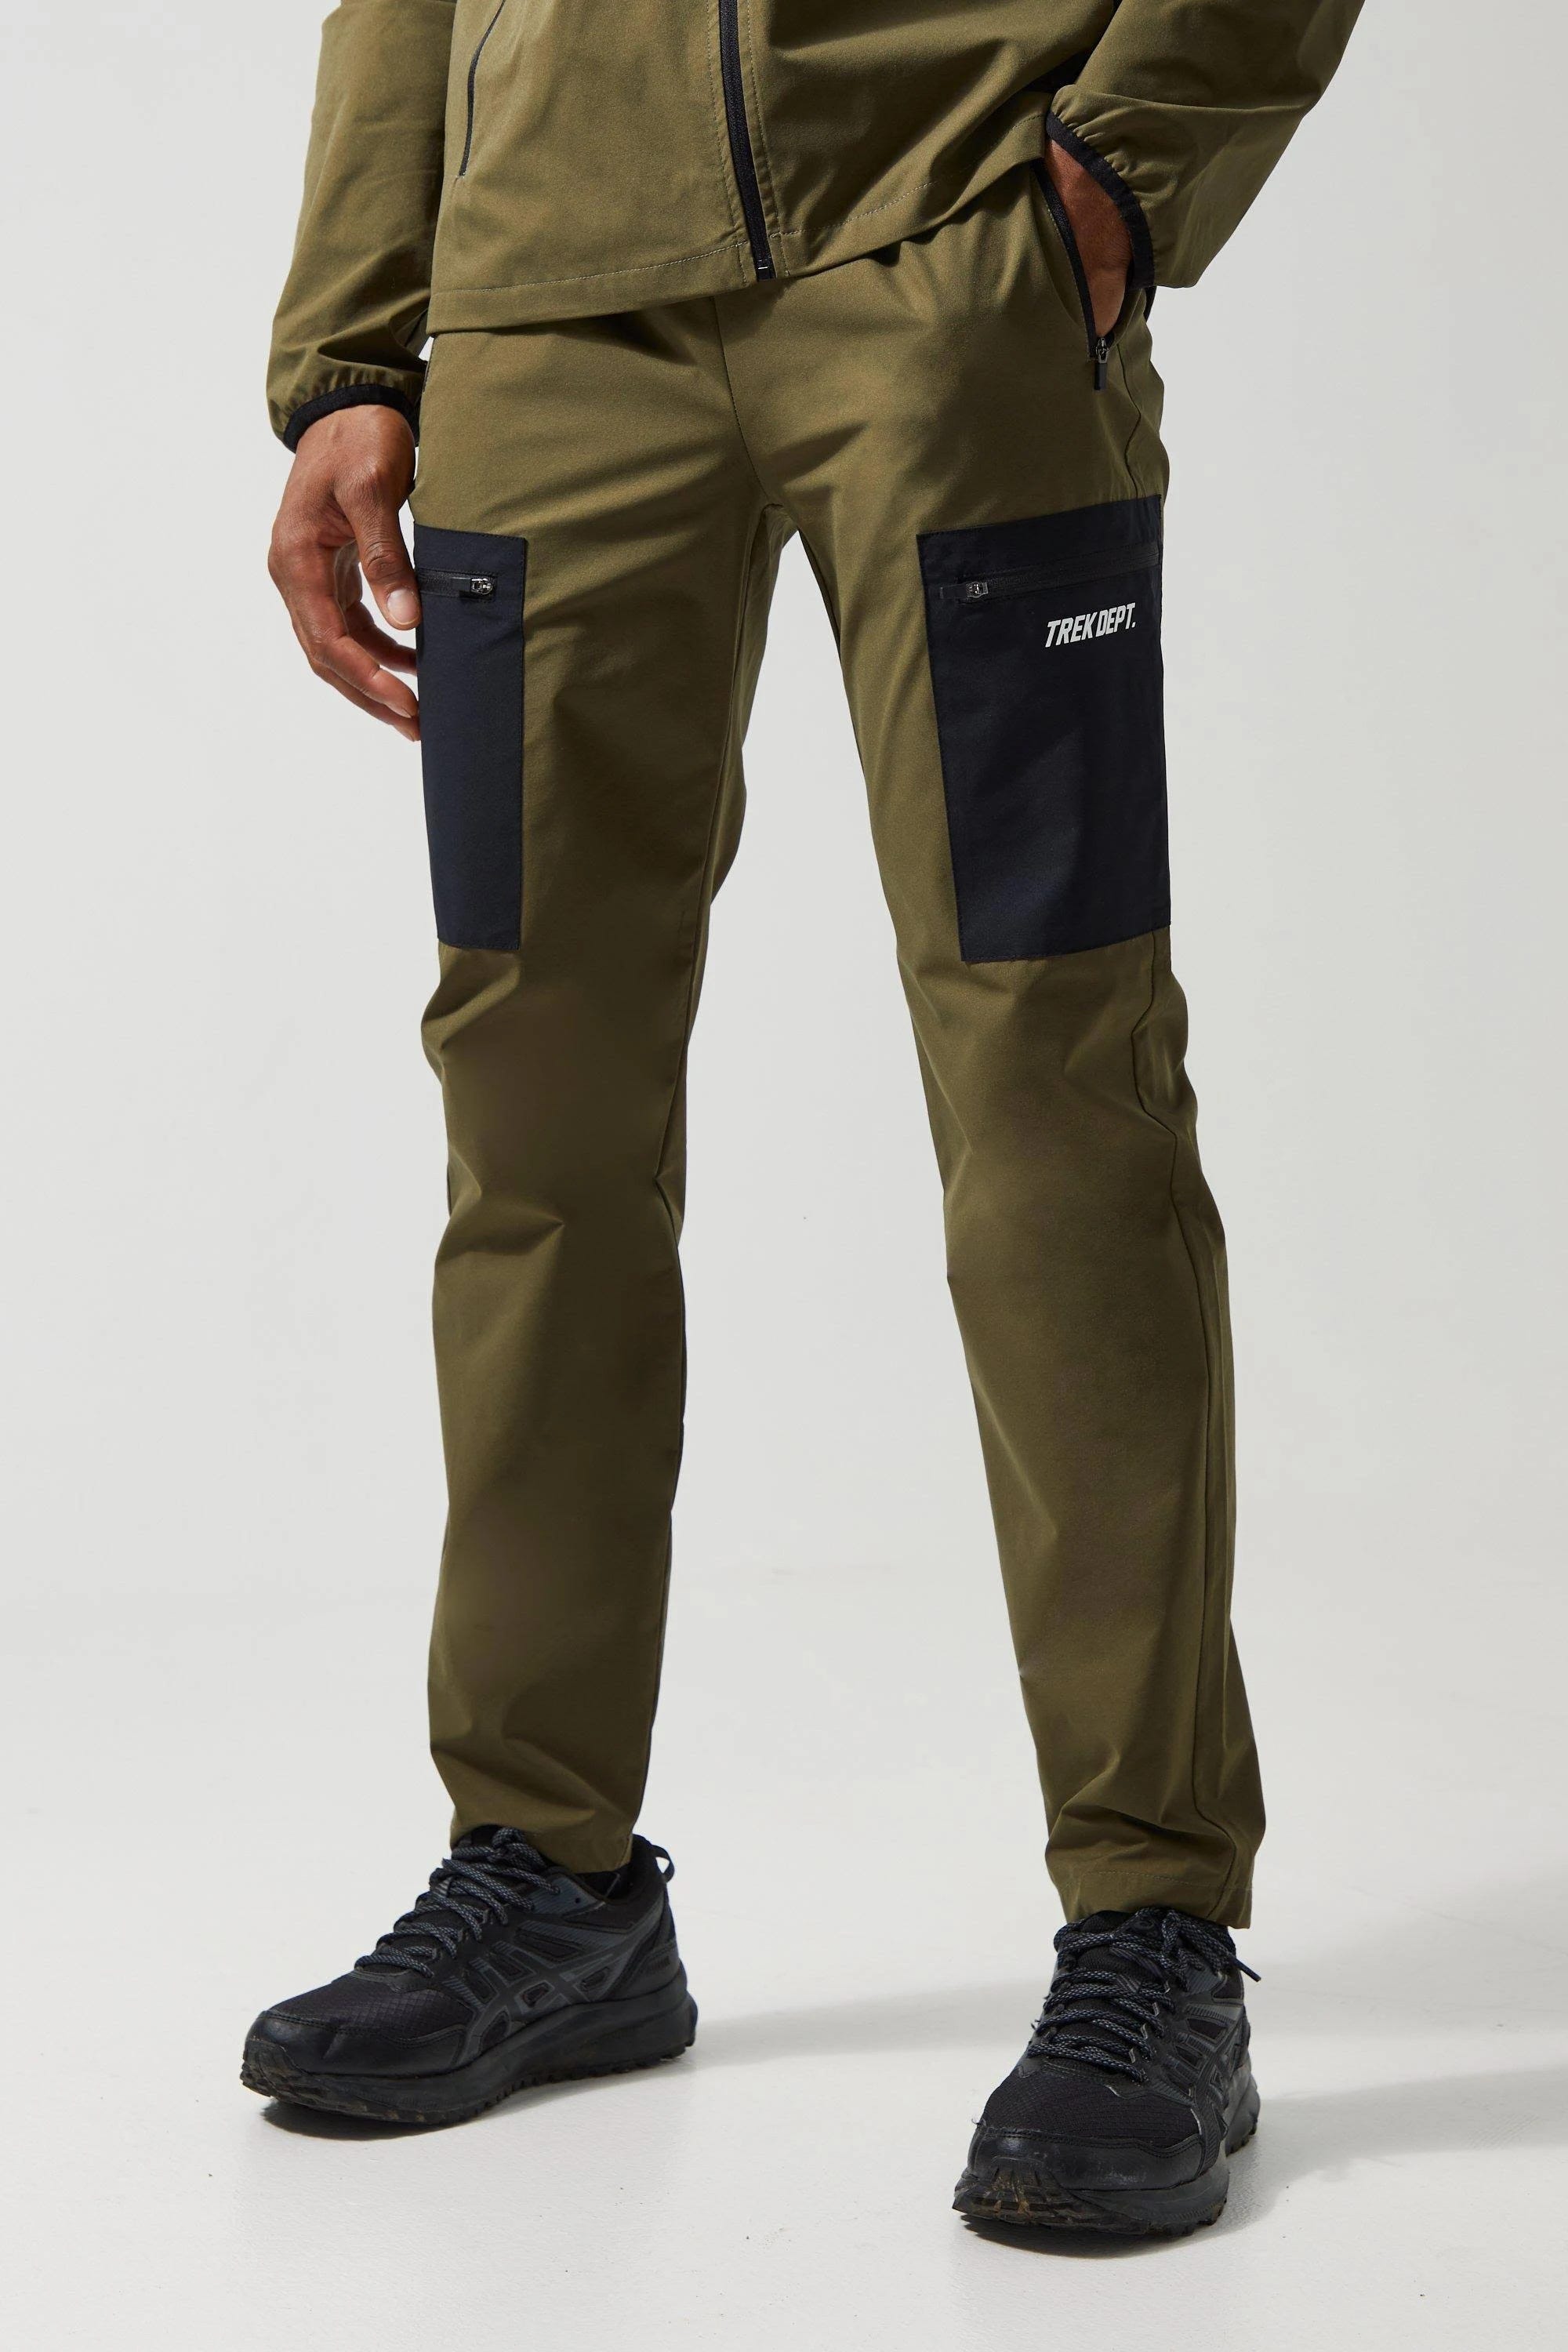 BoohooMAN Green Active Cargo Joggers for Men: Gorpcore Fashion and Functionality | Image